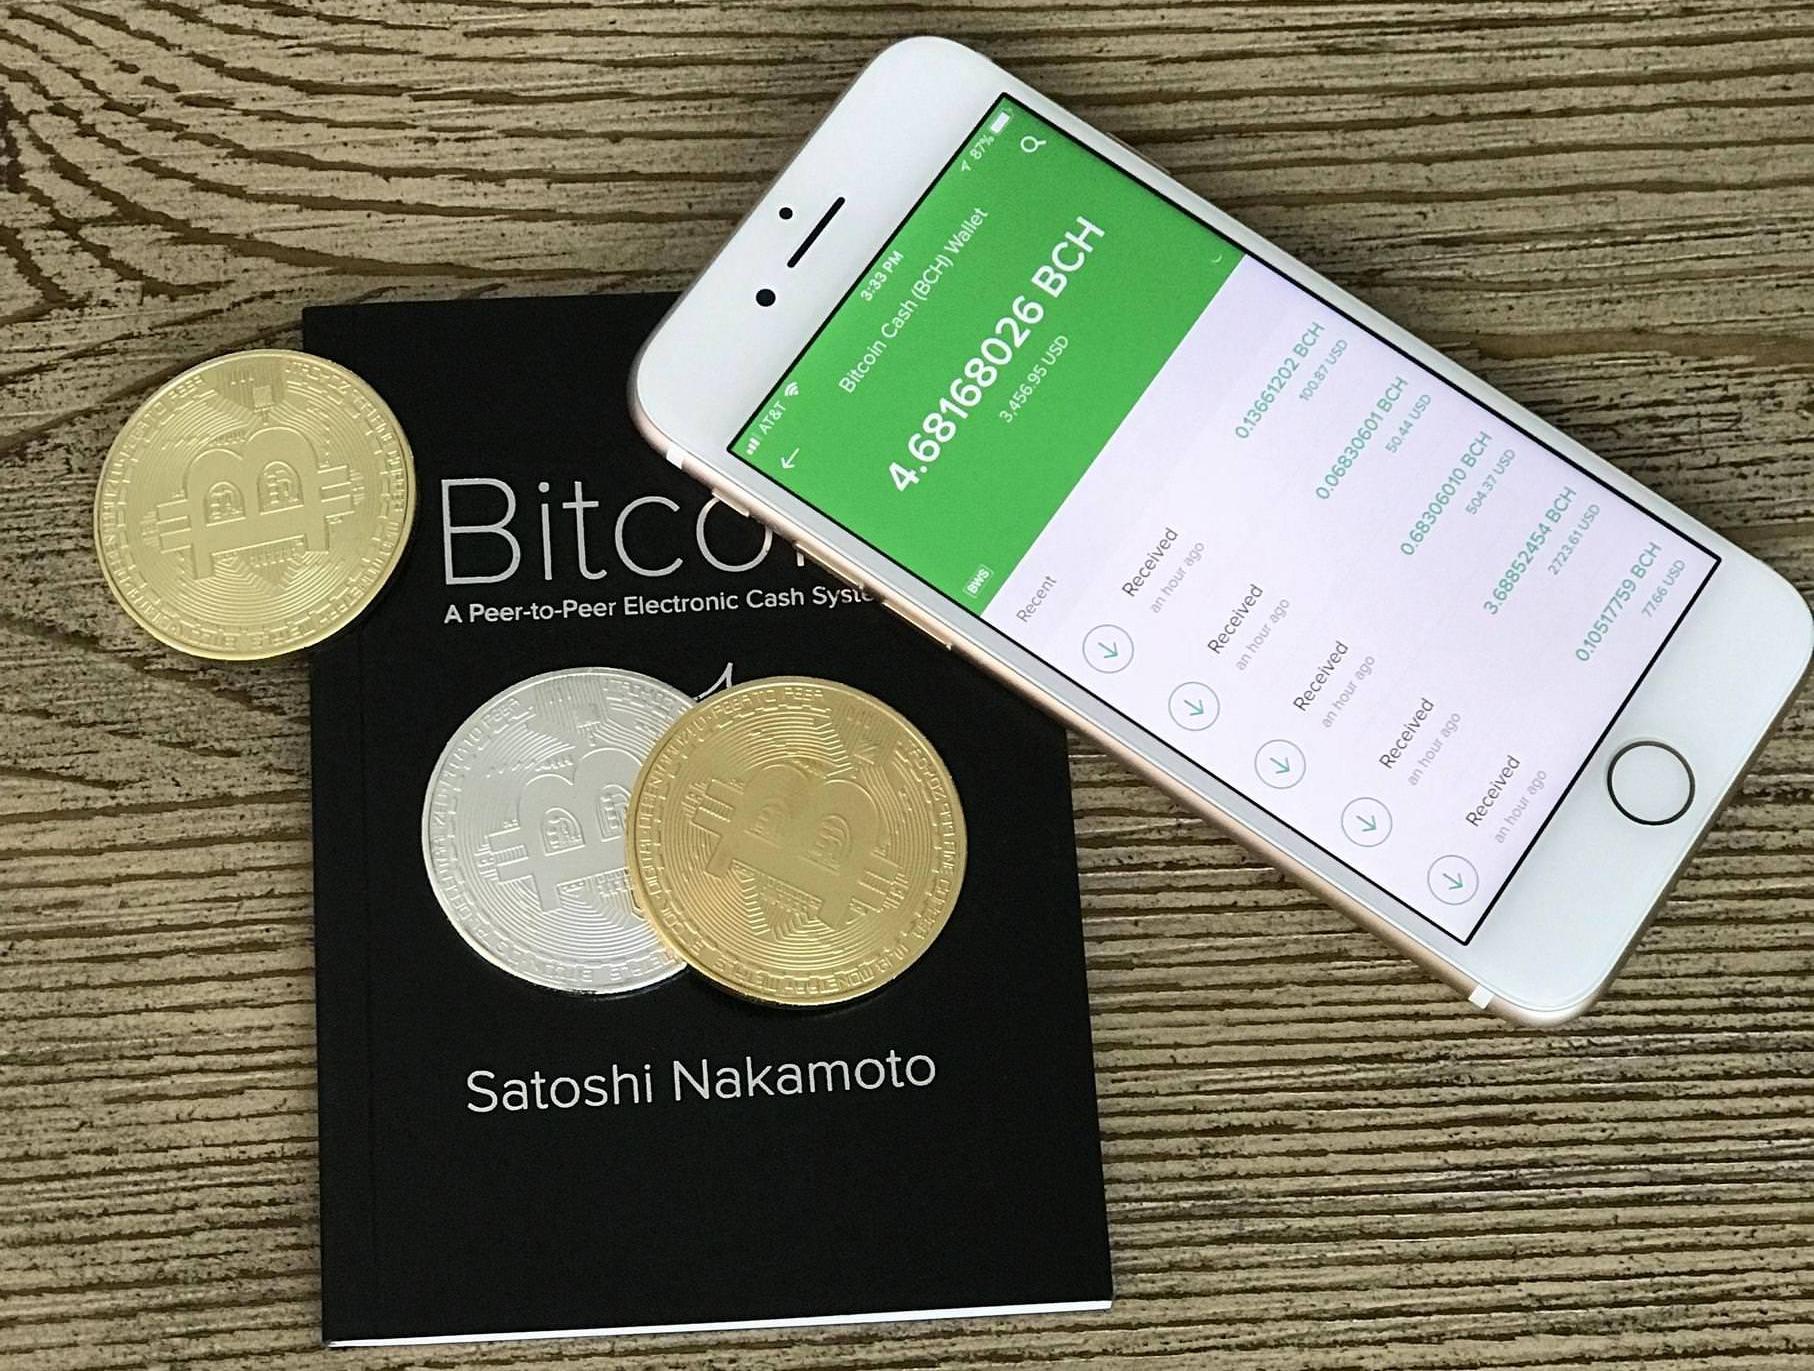 Bitcoin Cash wallet and whitepaper.jpg English: Photo of a mobile phone with a Bitcoin Cash wallet, Bitcoin whitepaper by Satoshi Nakamoto